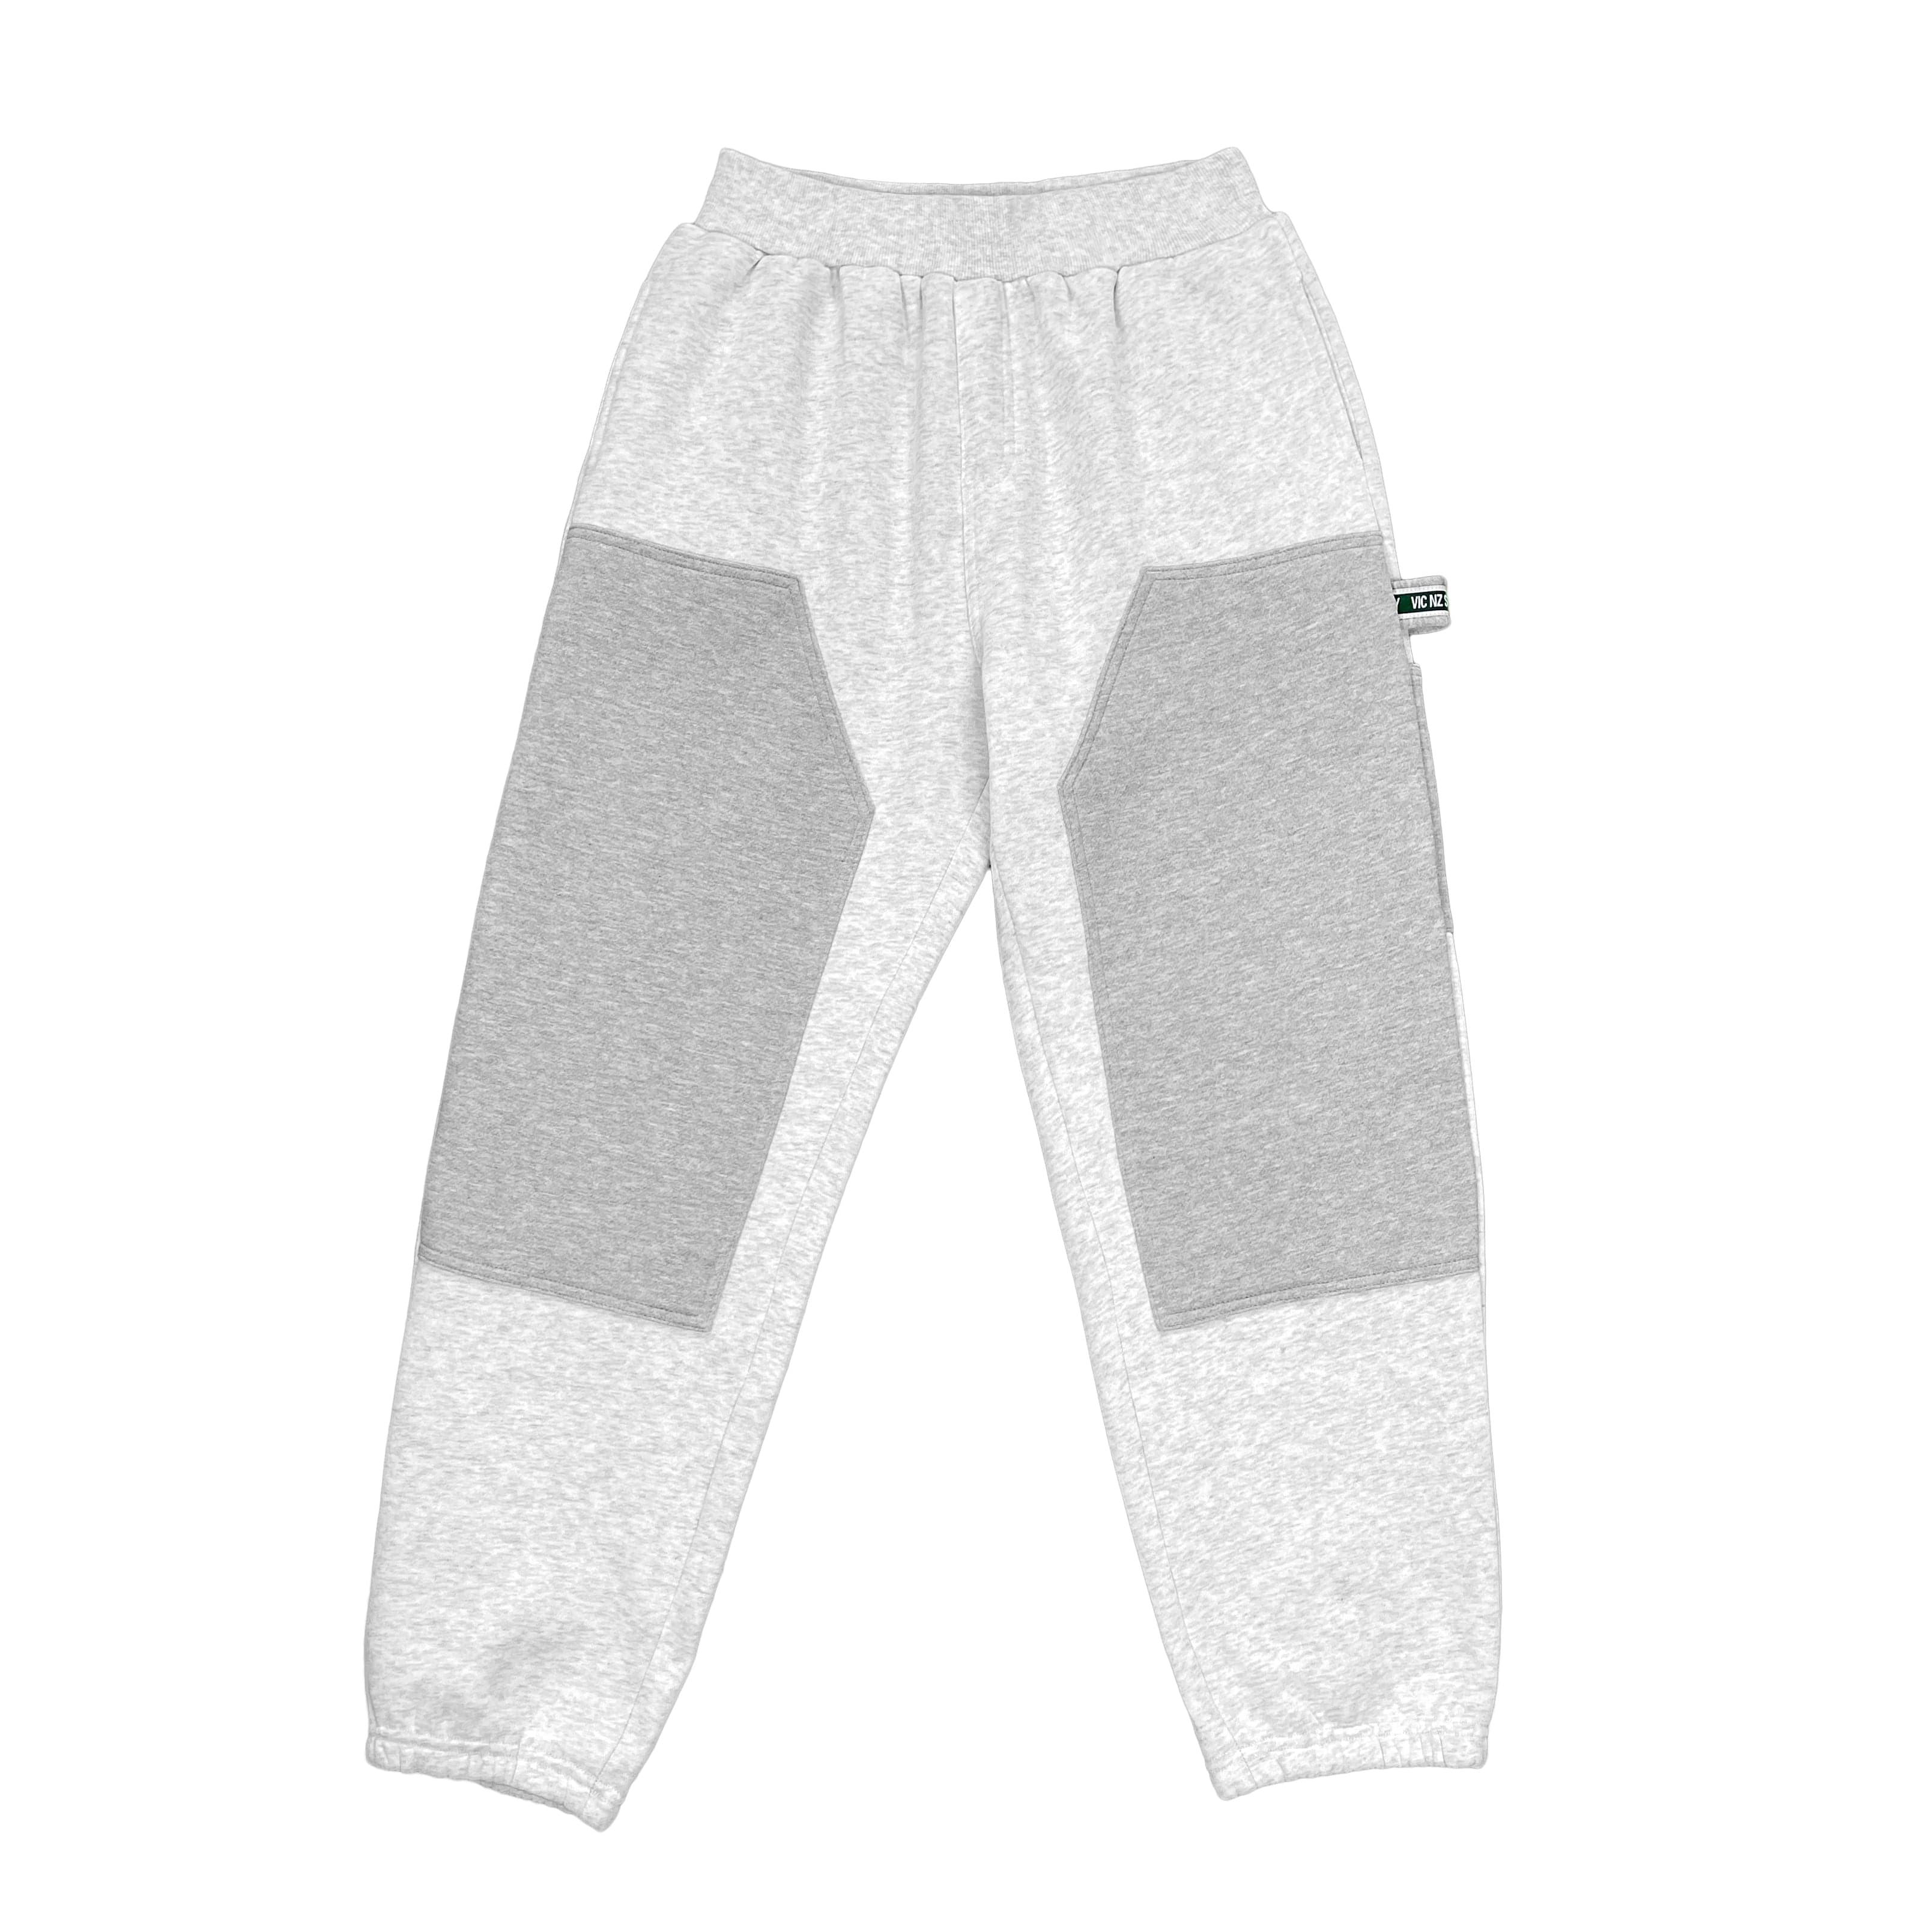 Premium quality double knee carpenter sweat track pants by New Zealand skate and streetwear clothing label VIC Apparel. Relaxed fit. Featuring front knee patch, utility pockets, a traditional hammer loop, and triple needle stitching. Inspired by the 80s & 90s Classic vintage workwear.